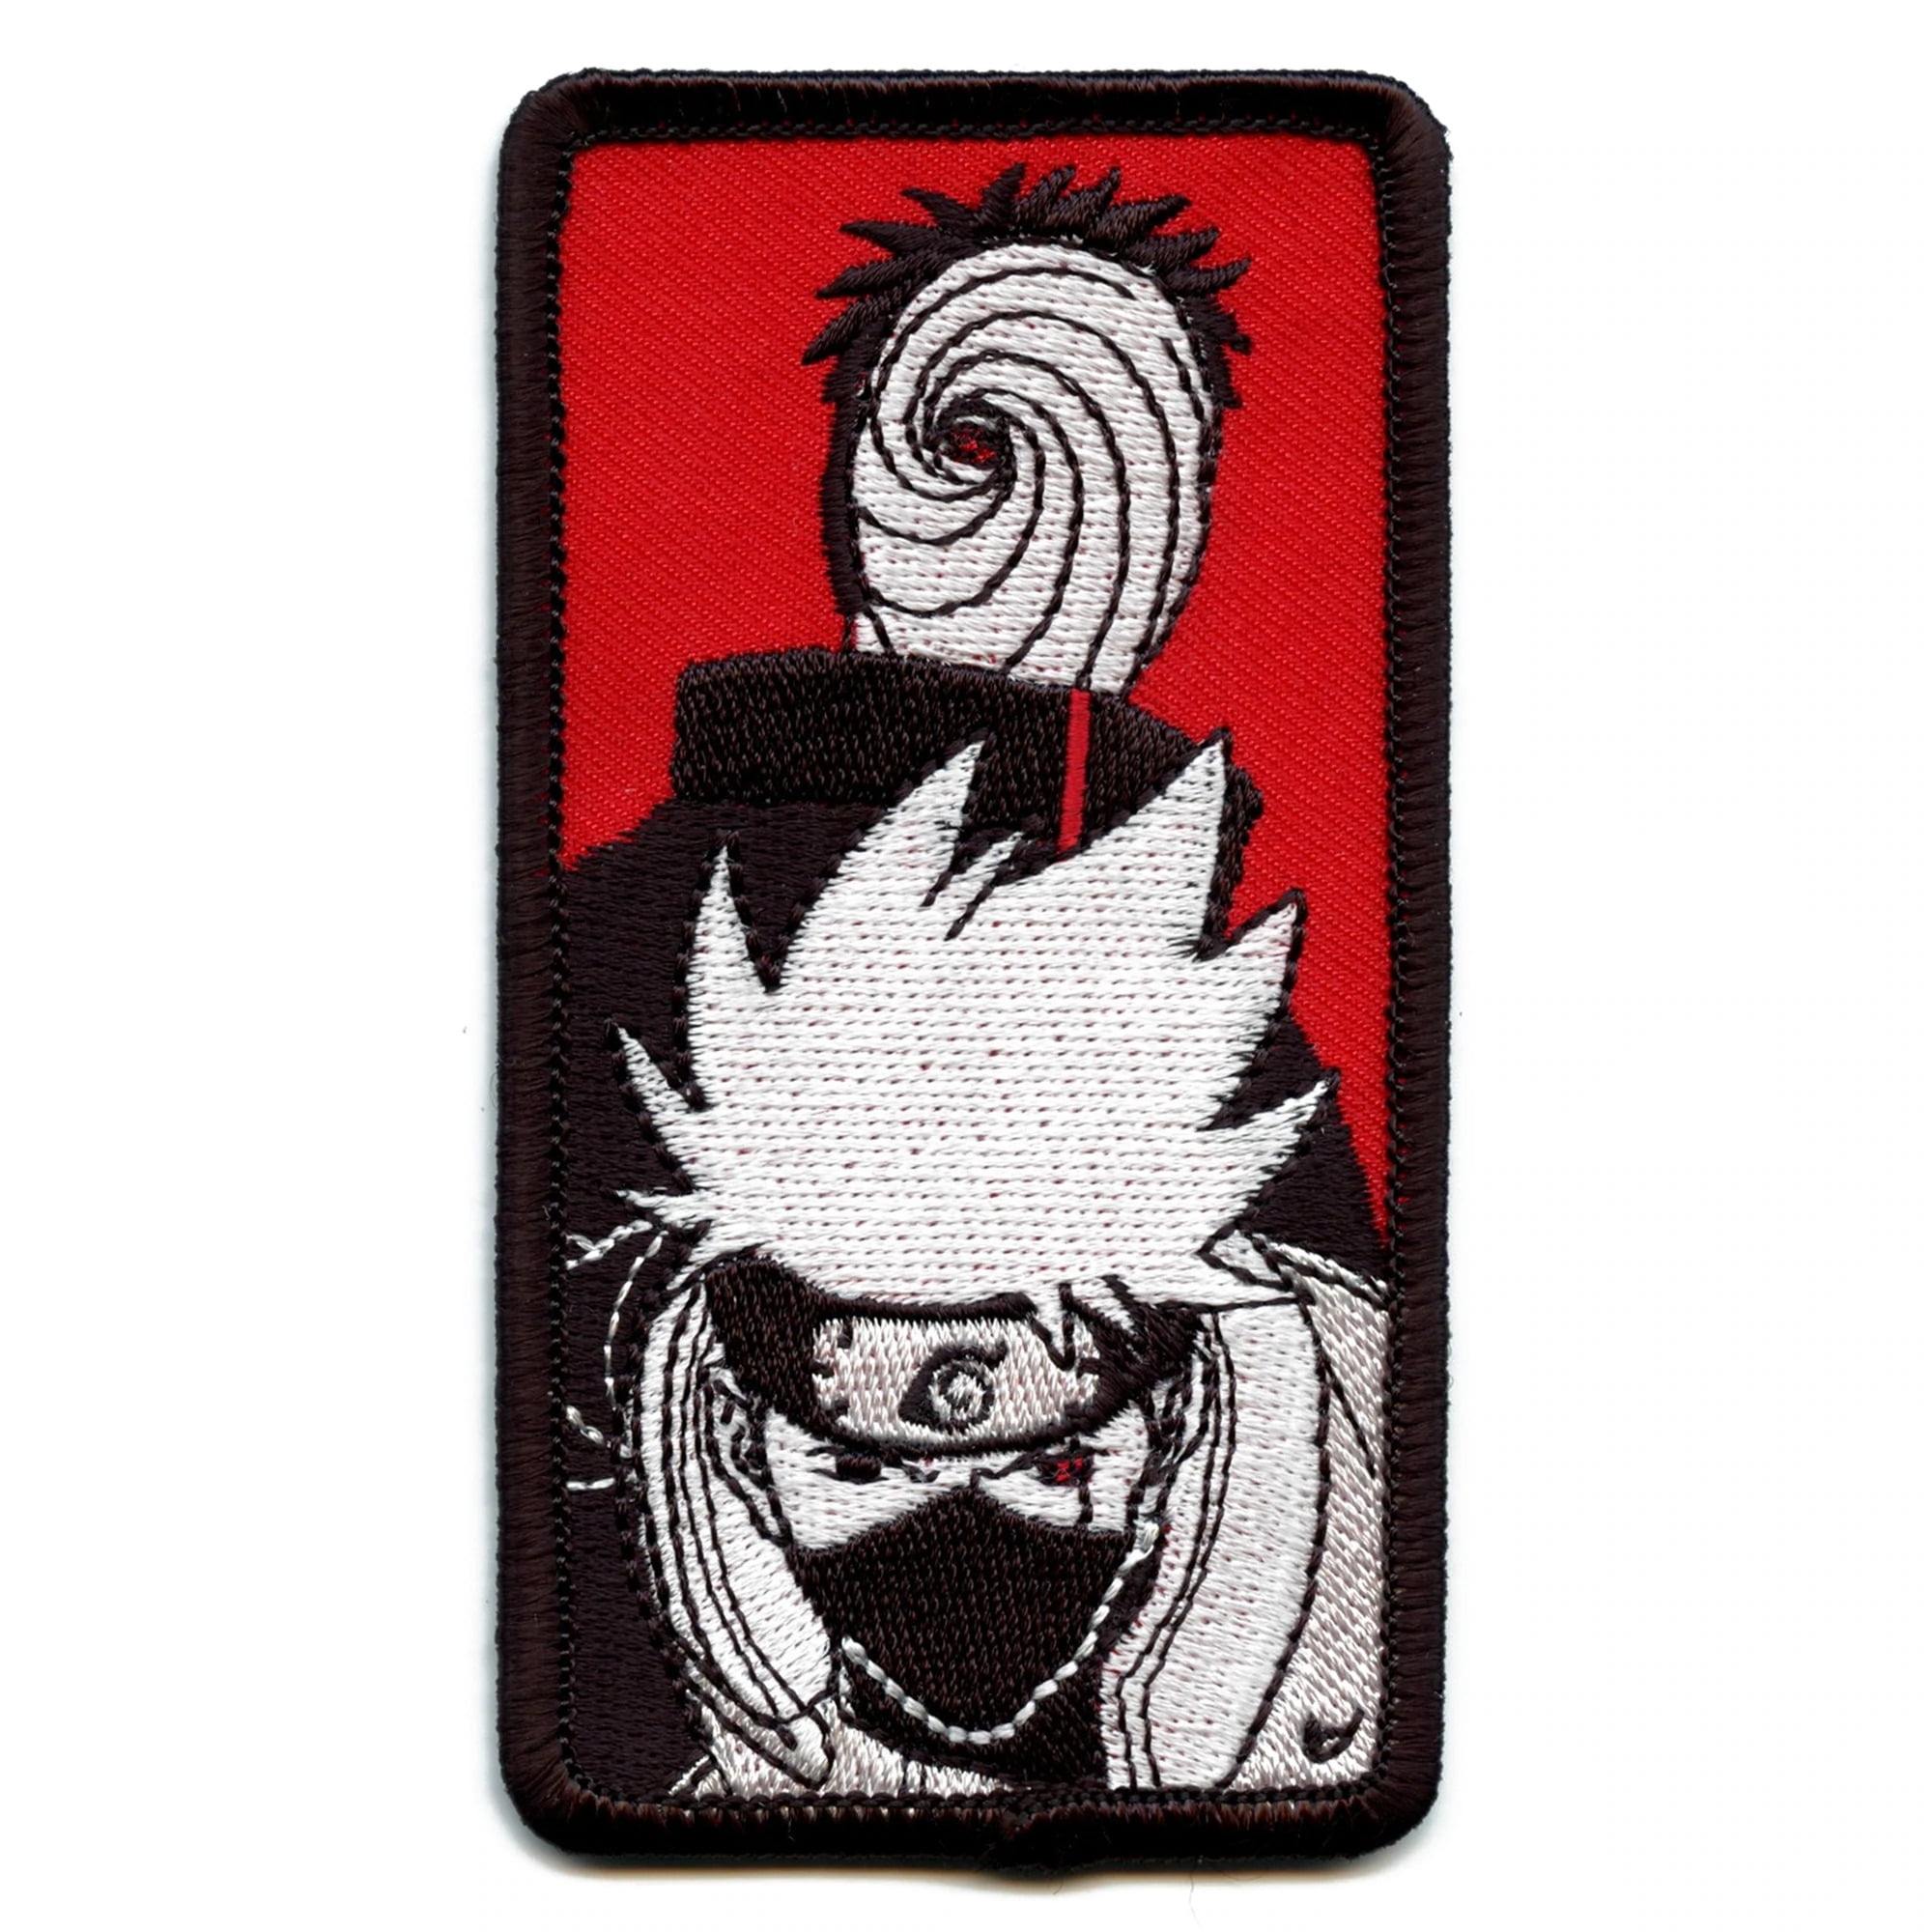 DarkBuckAnime Character Cloth Patches Combo Small for Clothes Jackets  Pants Jeans Bags Multicolour Different Iron or Stitching Patches Naruto  Demon Slayer Jujutsu Kaisen  Amazonin Home  Kitchen